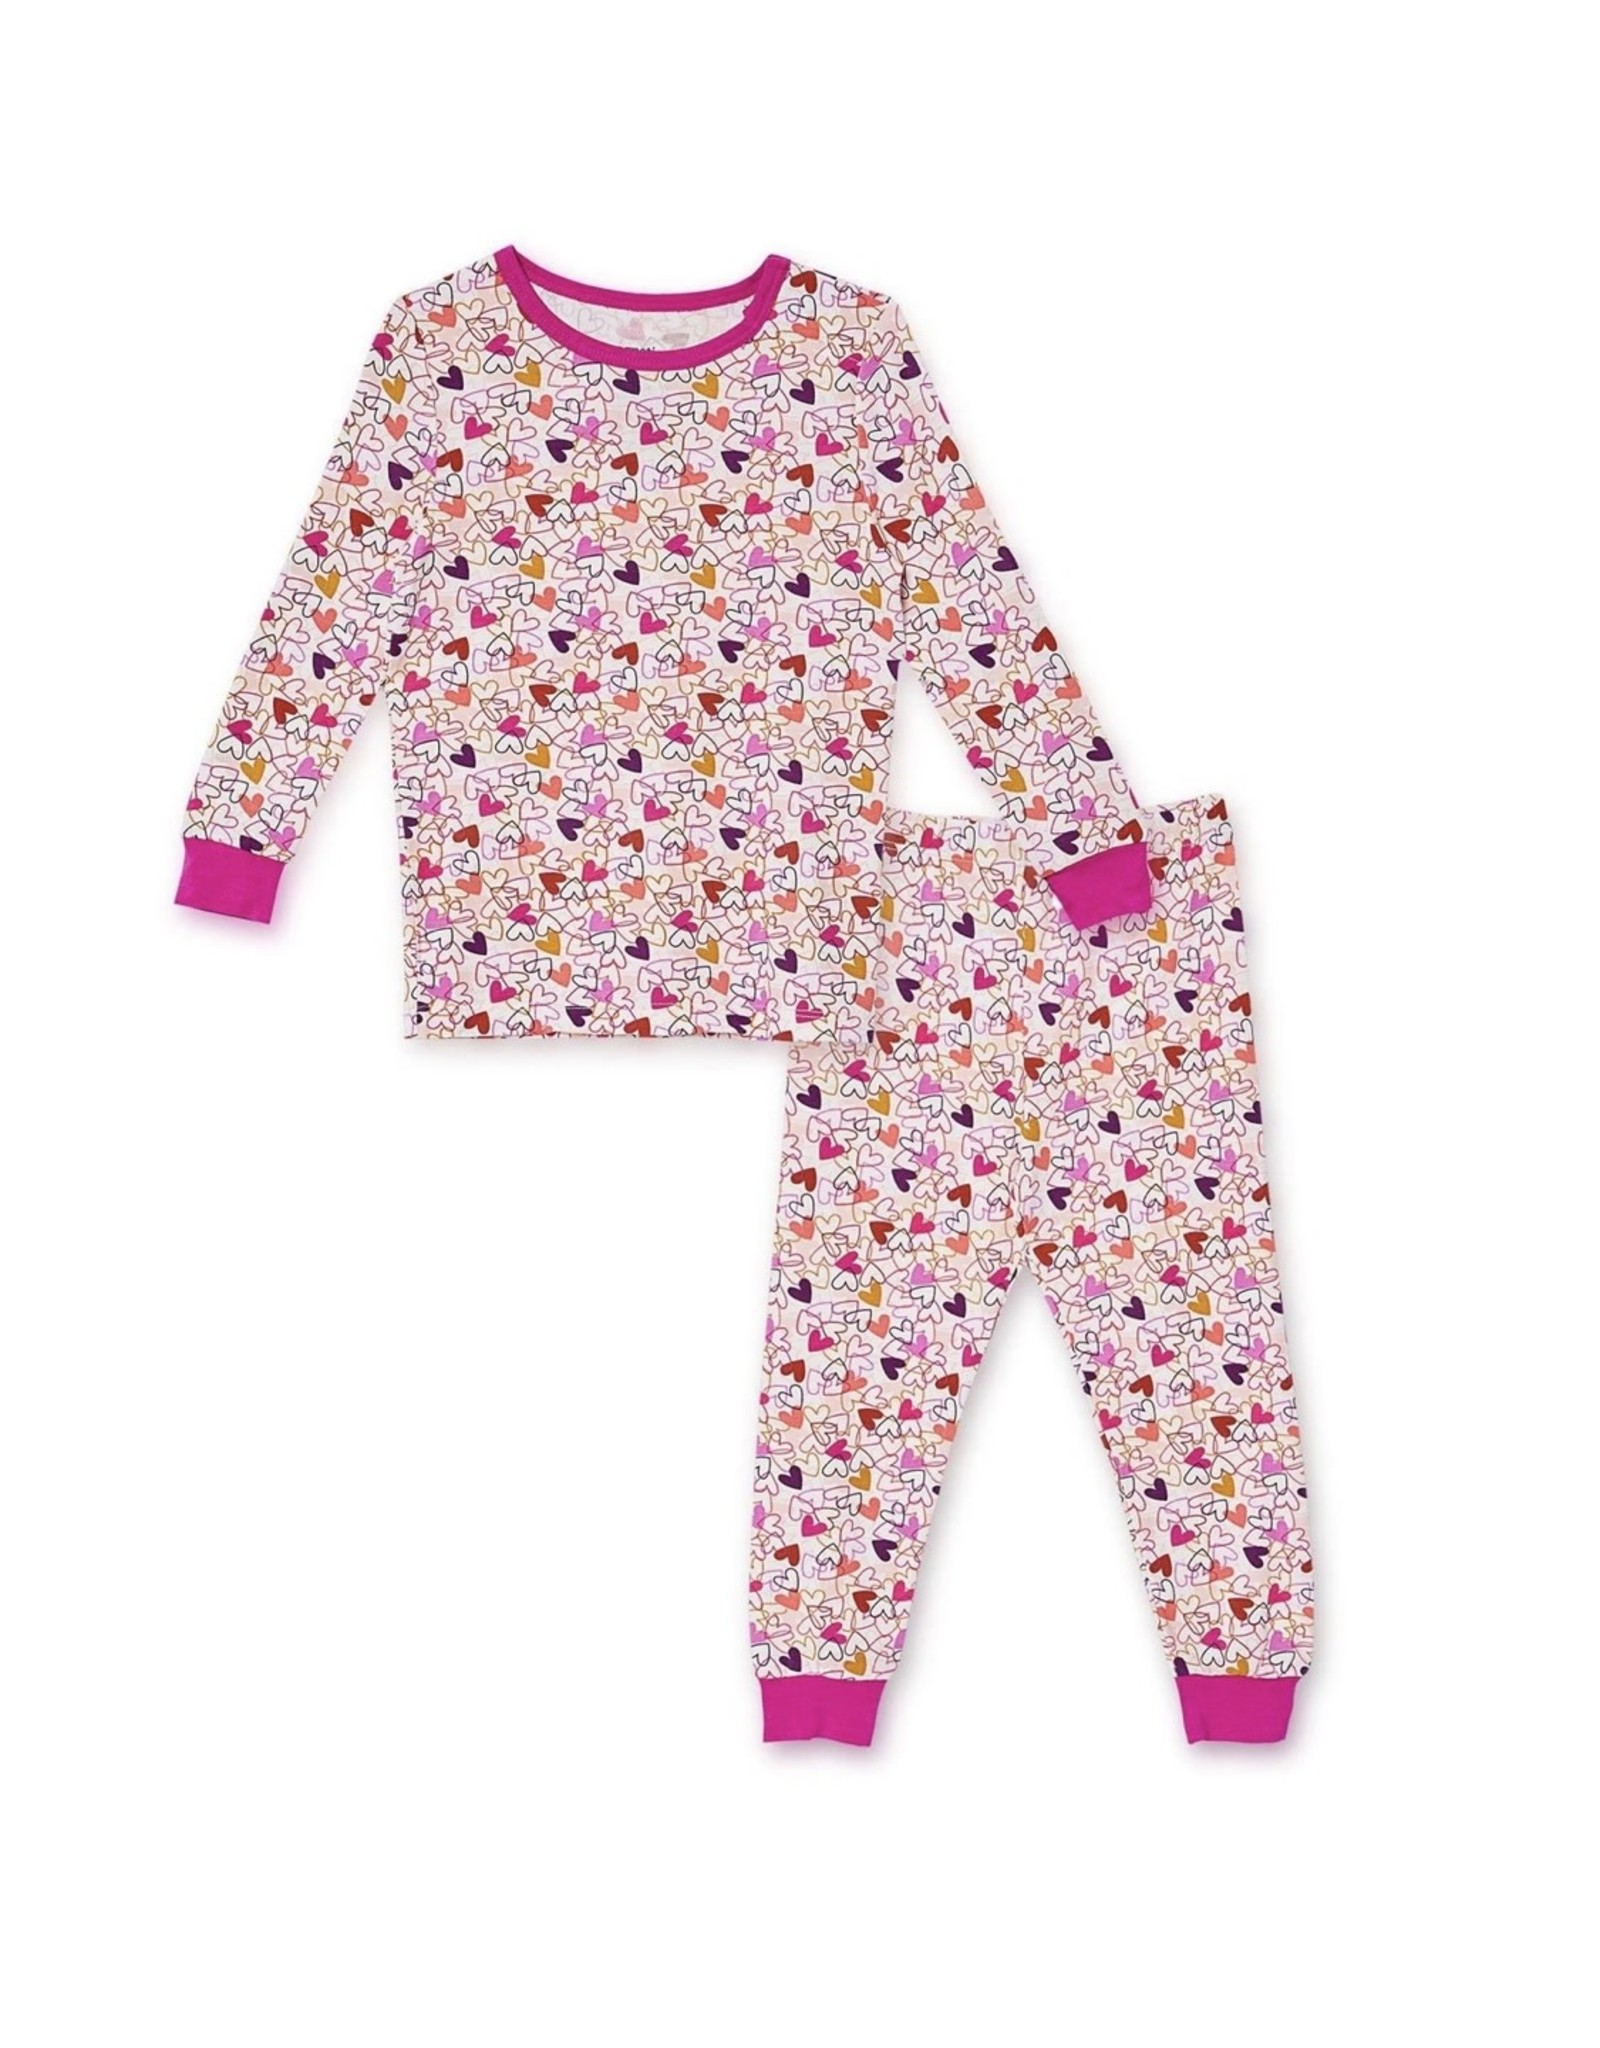 Magnetic Me Magnetic Me- Heart to Heart Toddler PJ